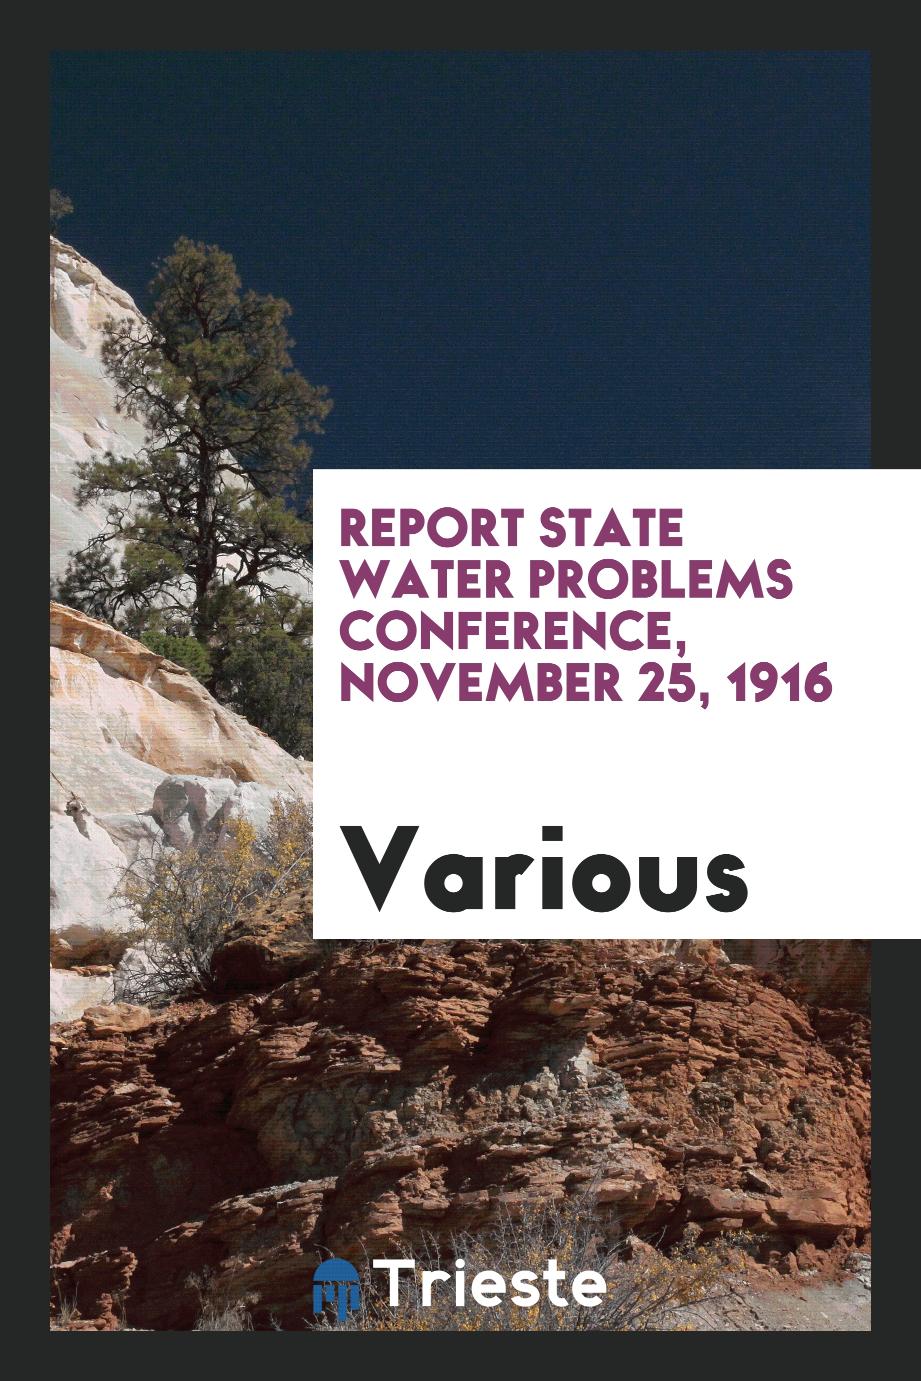 Report State Water Problems Conference, November 25, 1916